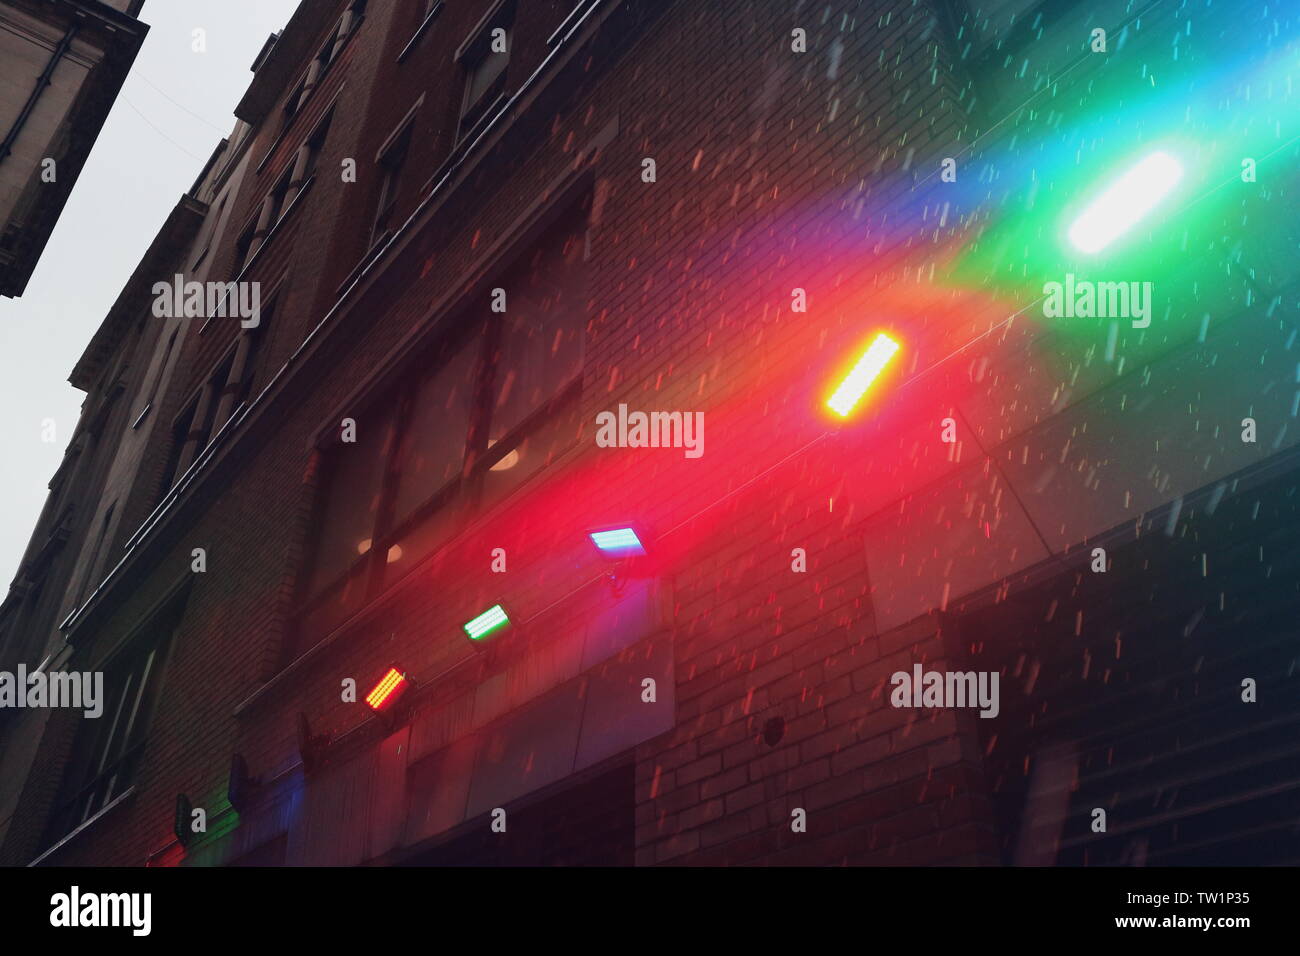 Green and red lights shining in front of a brick house on a rainy day in Lodnon, UK. Stock Photo